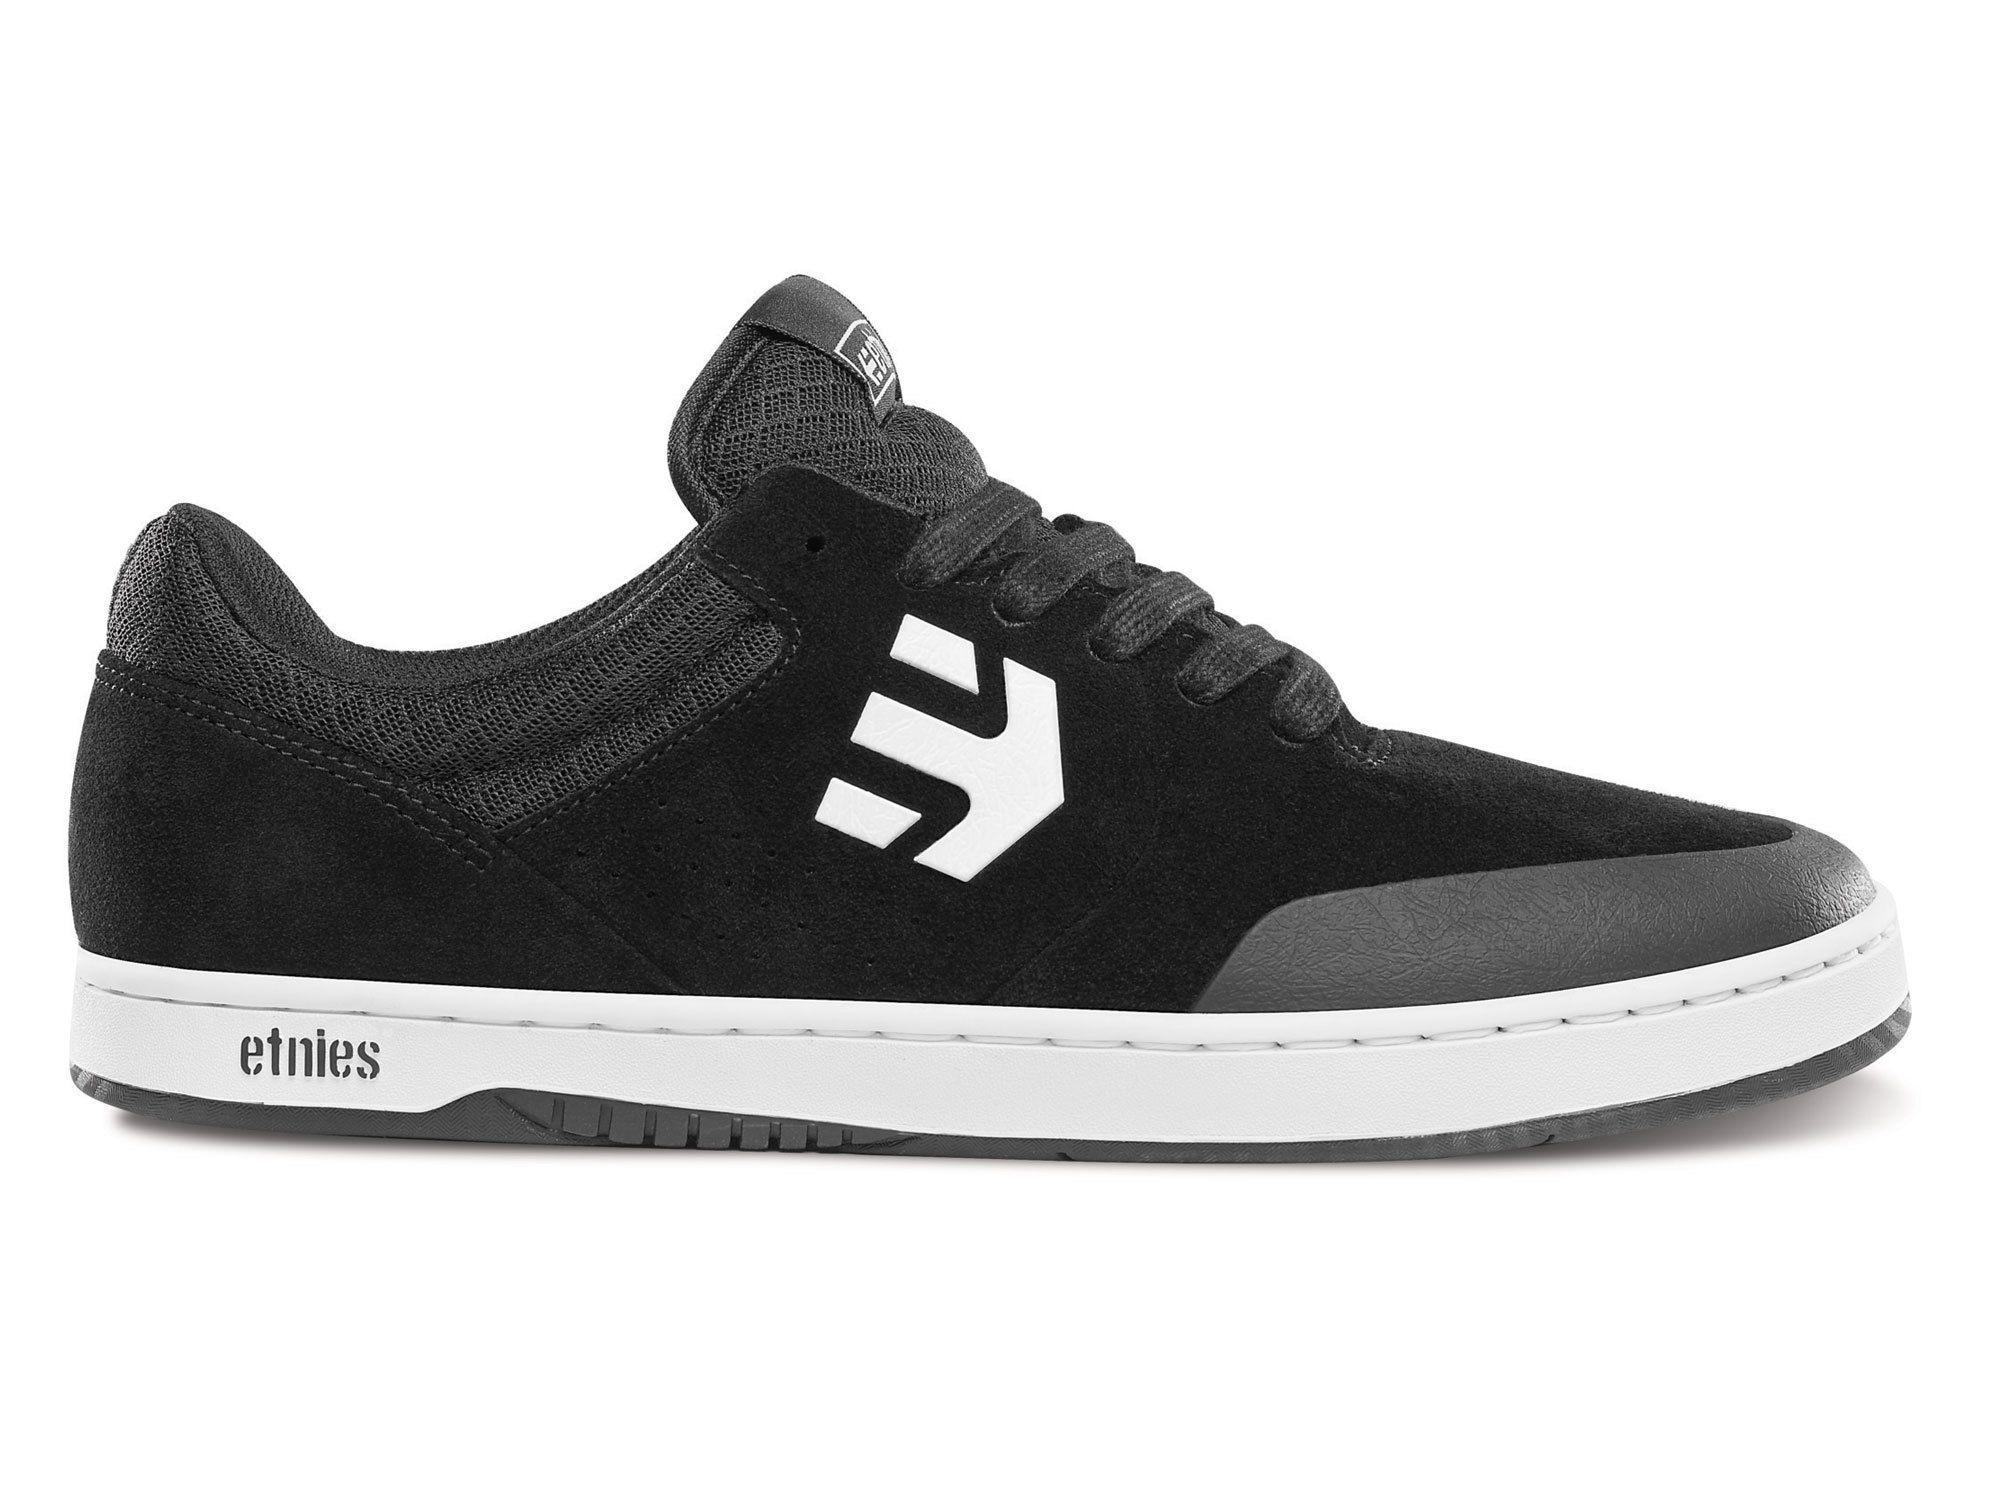 Sammie reccomend Asian style skate shoes